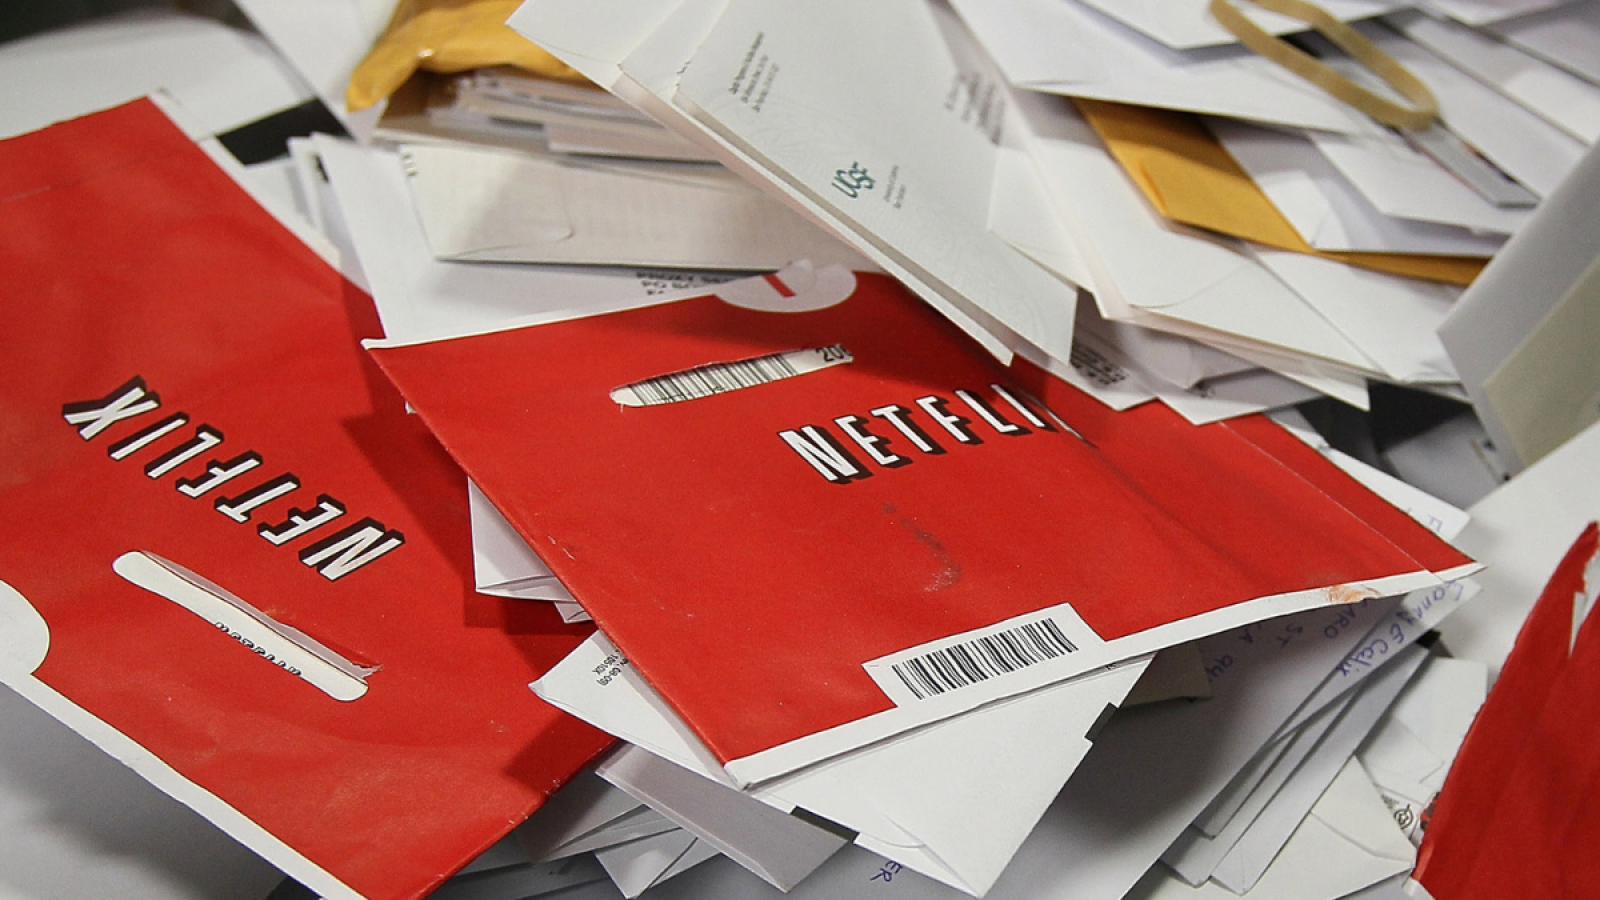 Netflix DVD Subscribers Mourn Loss of Service After 25 Years